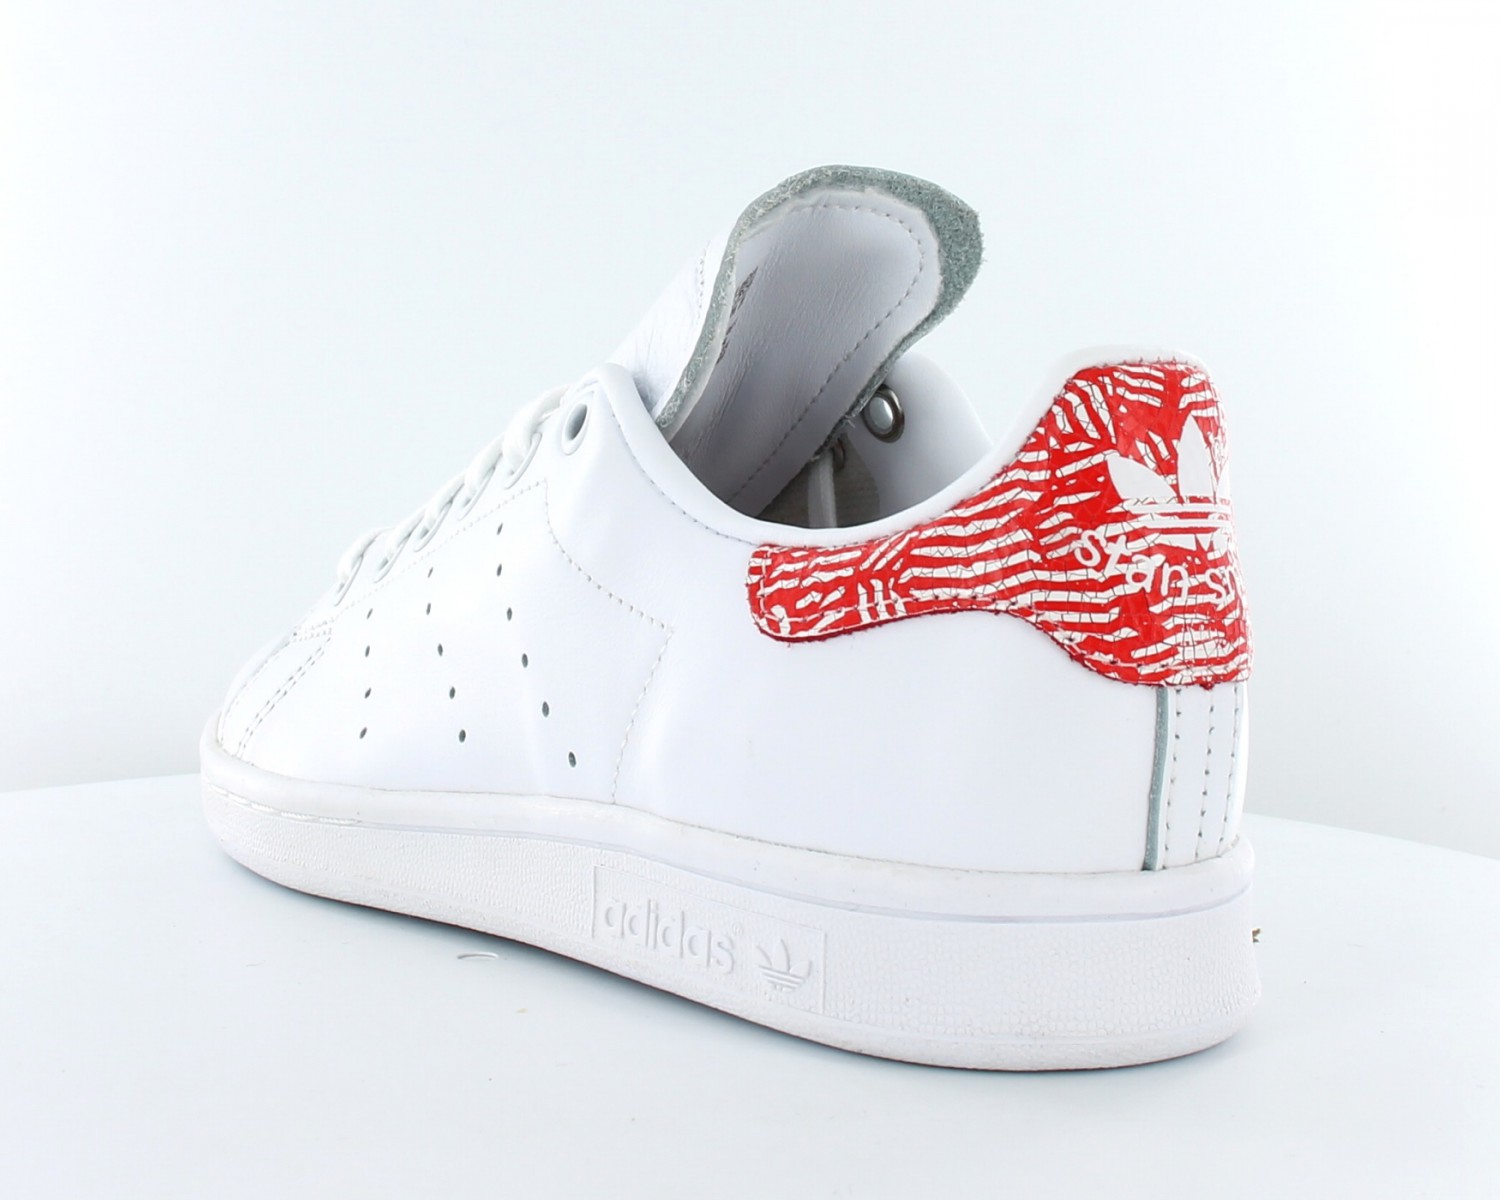 adidas stan smith blanche et rouge